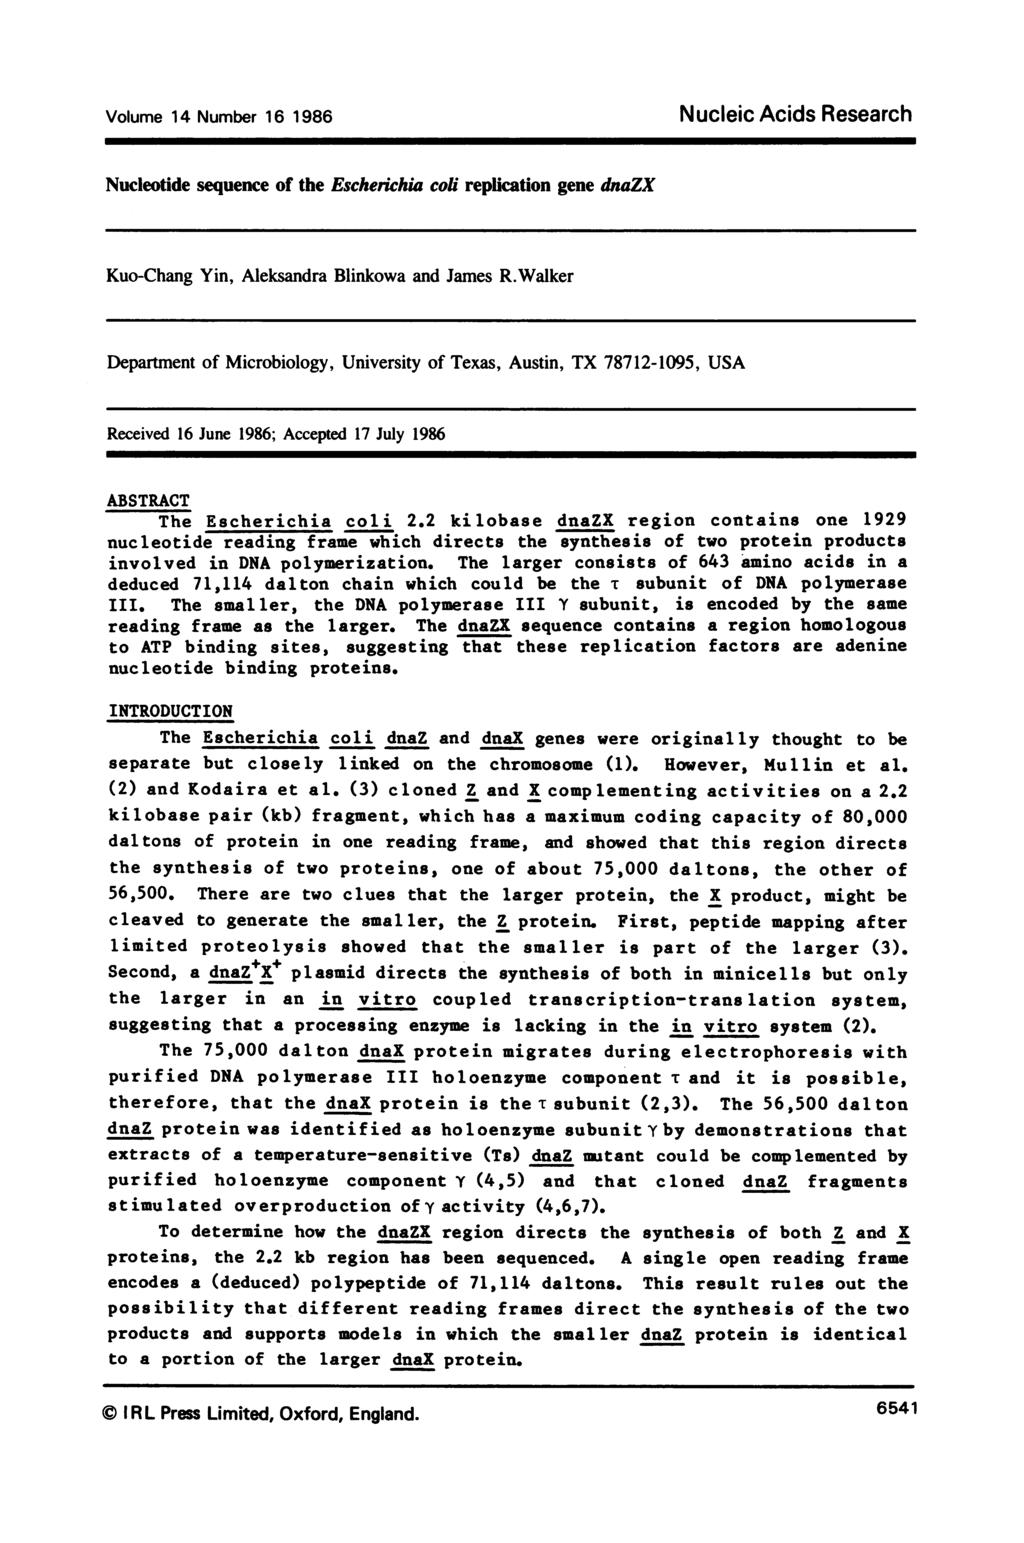 Volume 14 Number 16 1986 Nucleic Acids Research Nucleotide sequence of the Eschenchia coli replication gene dnazx Kuo-Chang Yin, Aleksandra Blinkowa and James R.